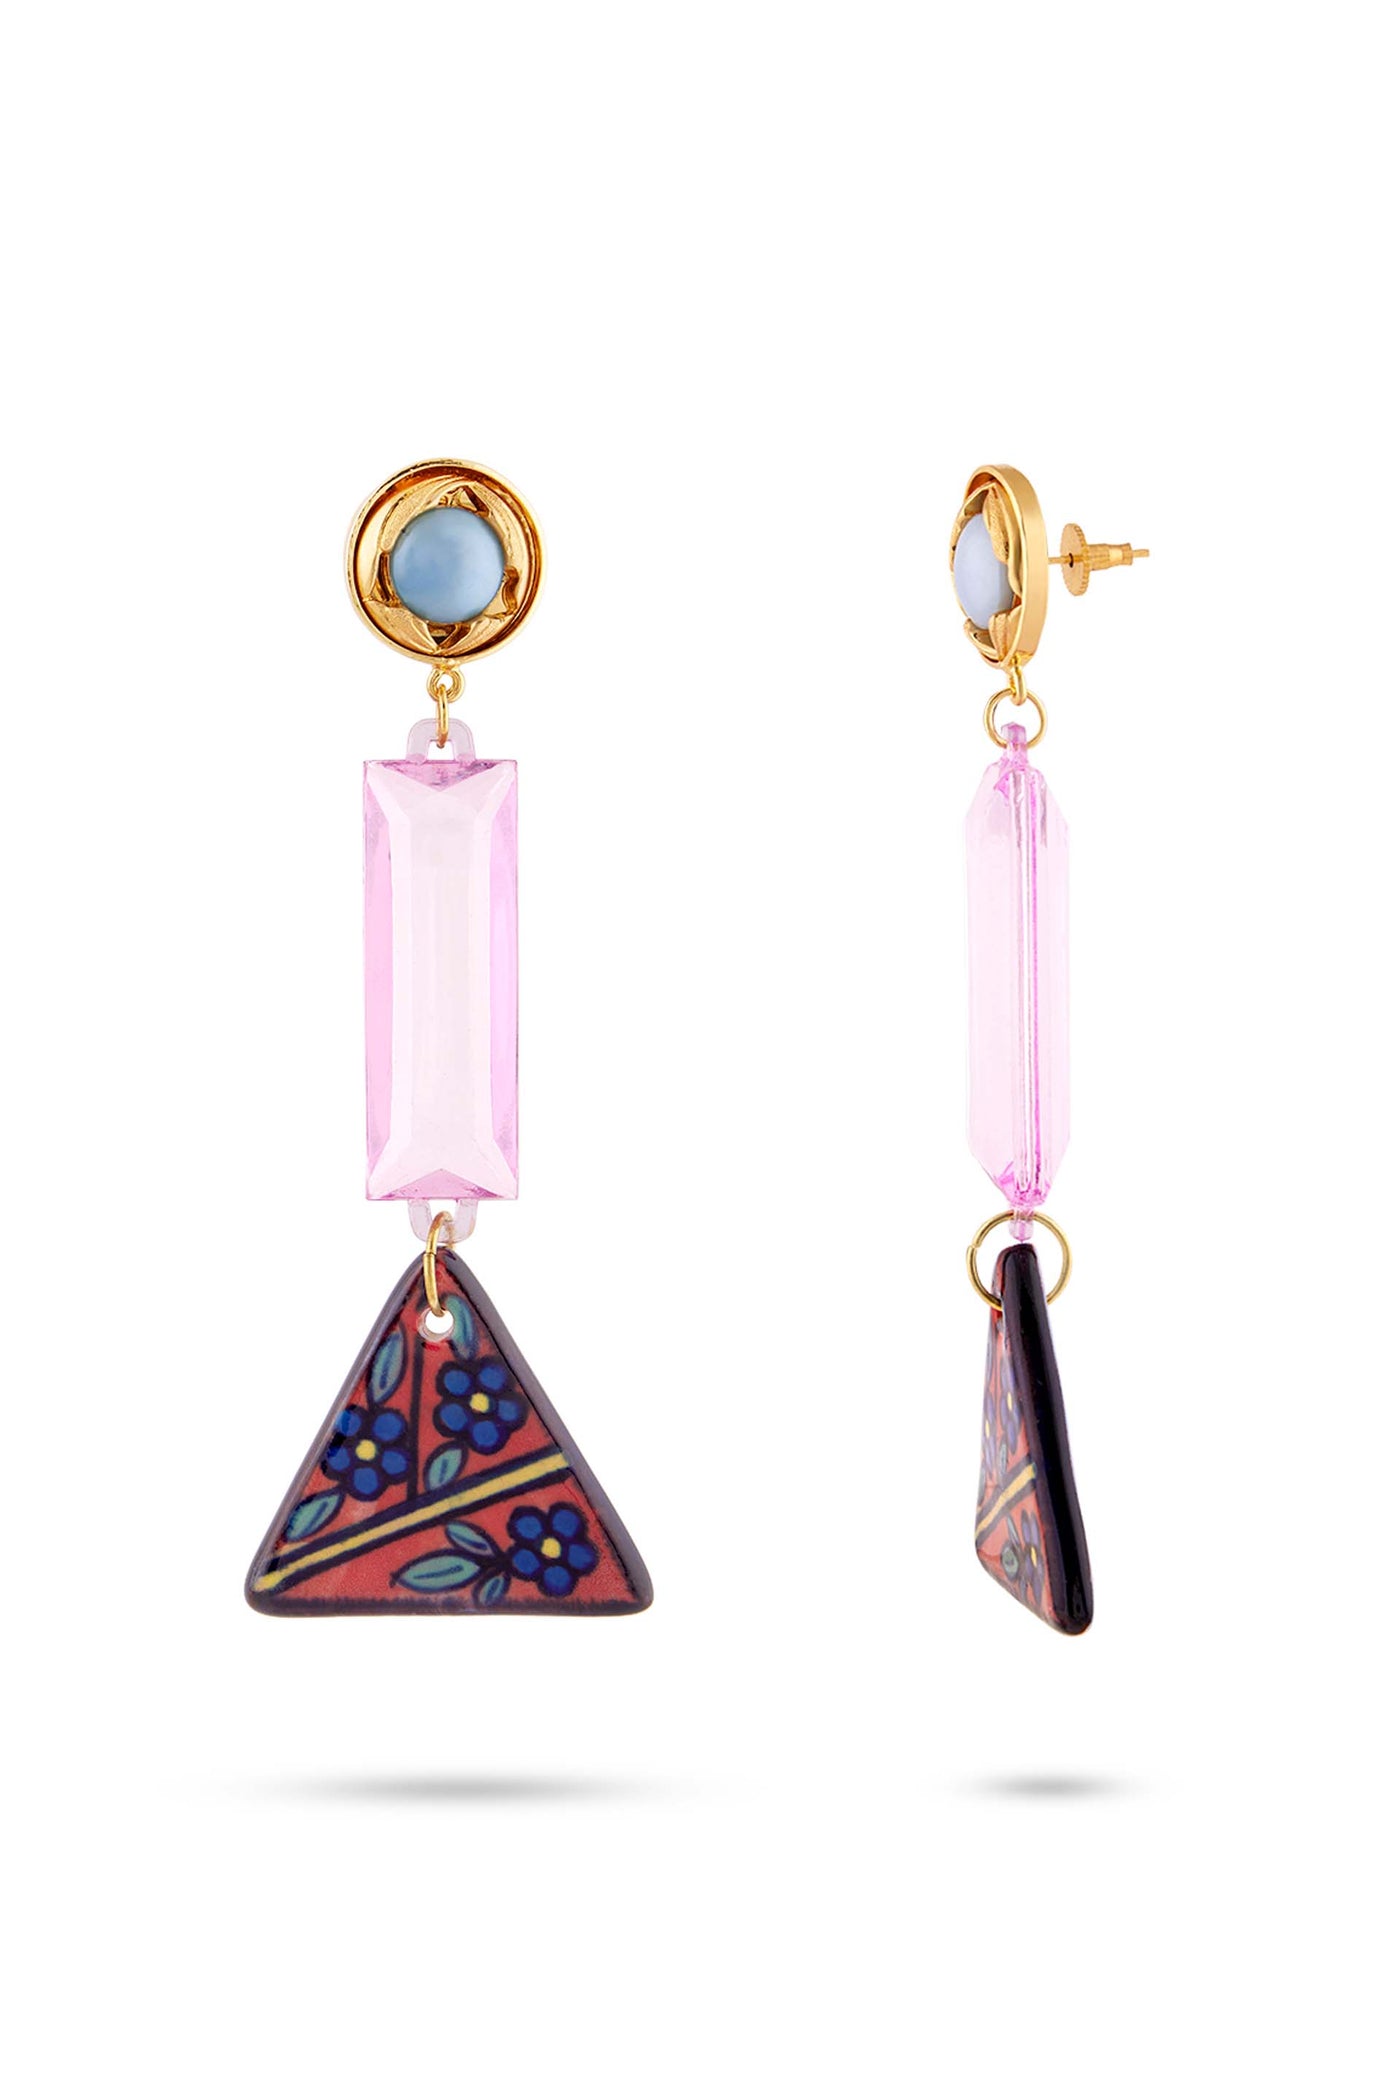 Valiiyan Picasso Earrings pink with blue button fashion jewellery online shopping melange singapore India designer wear